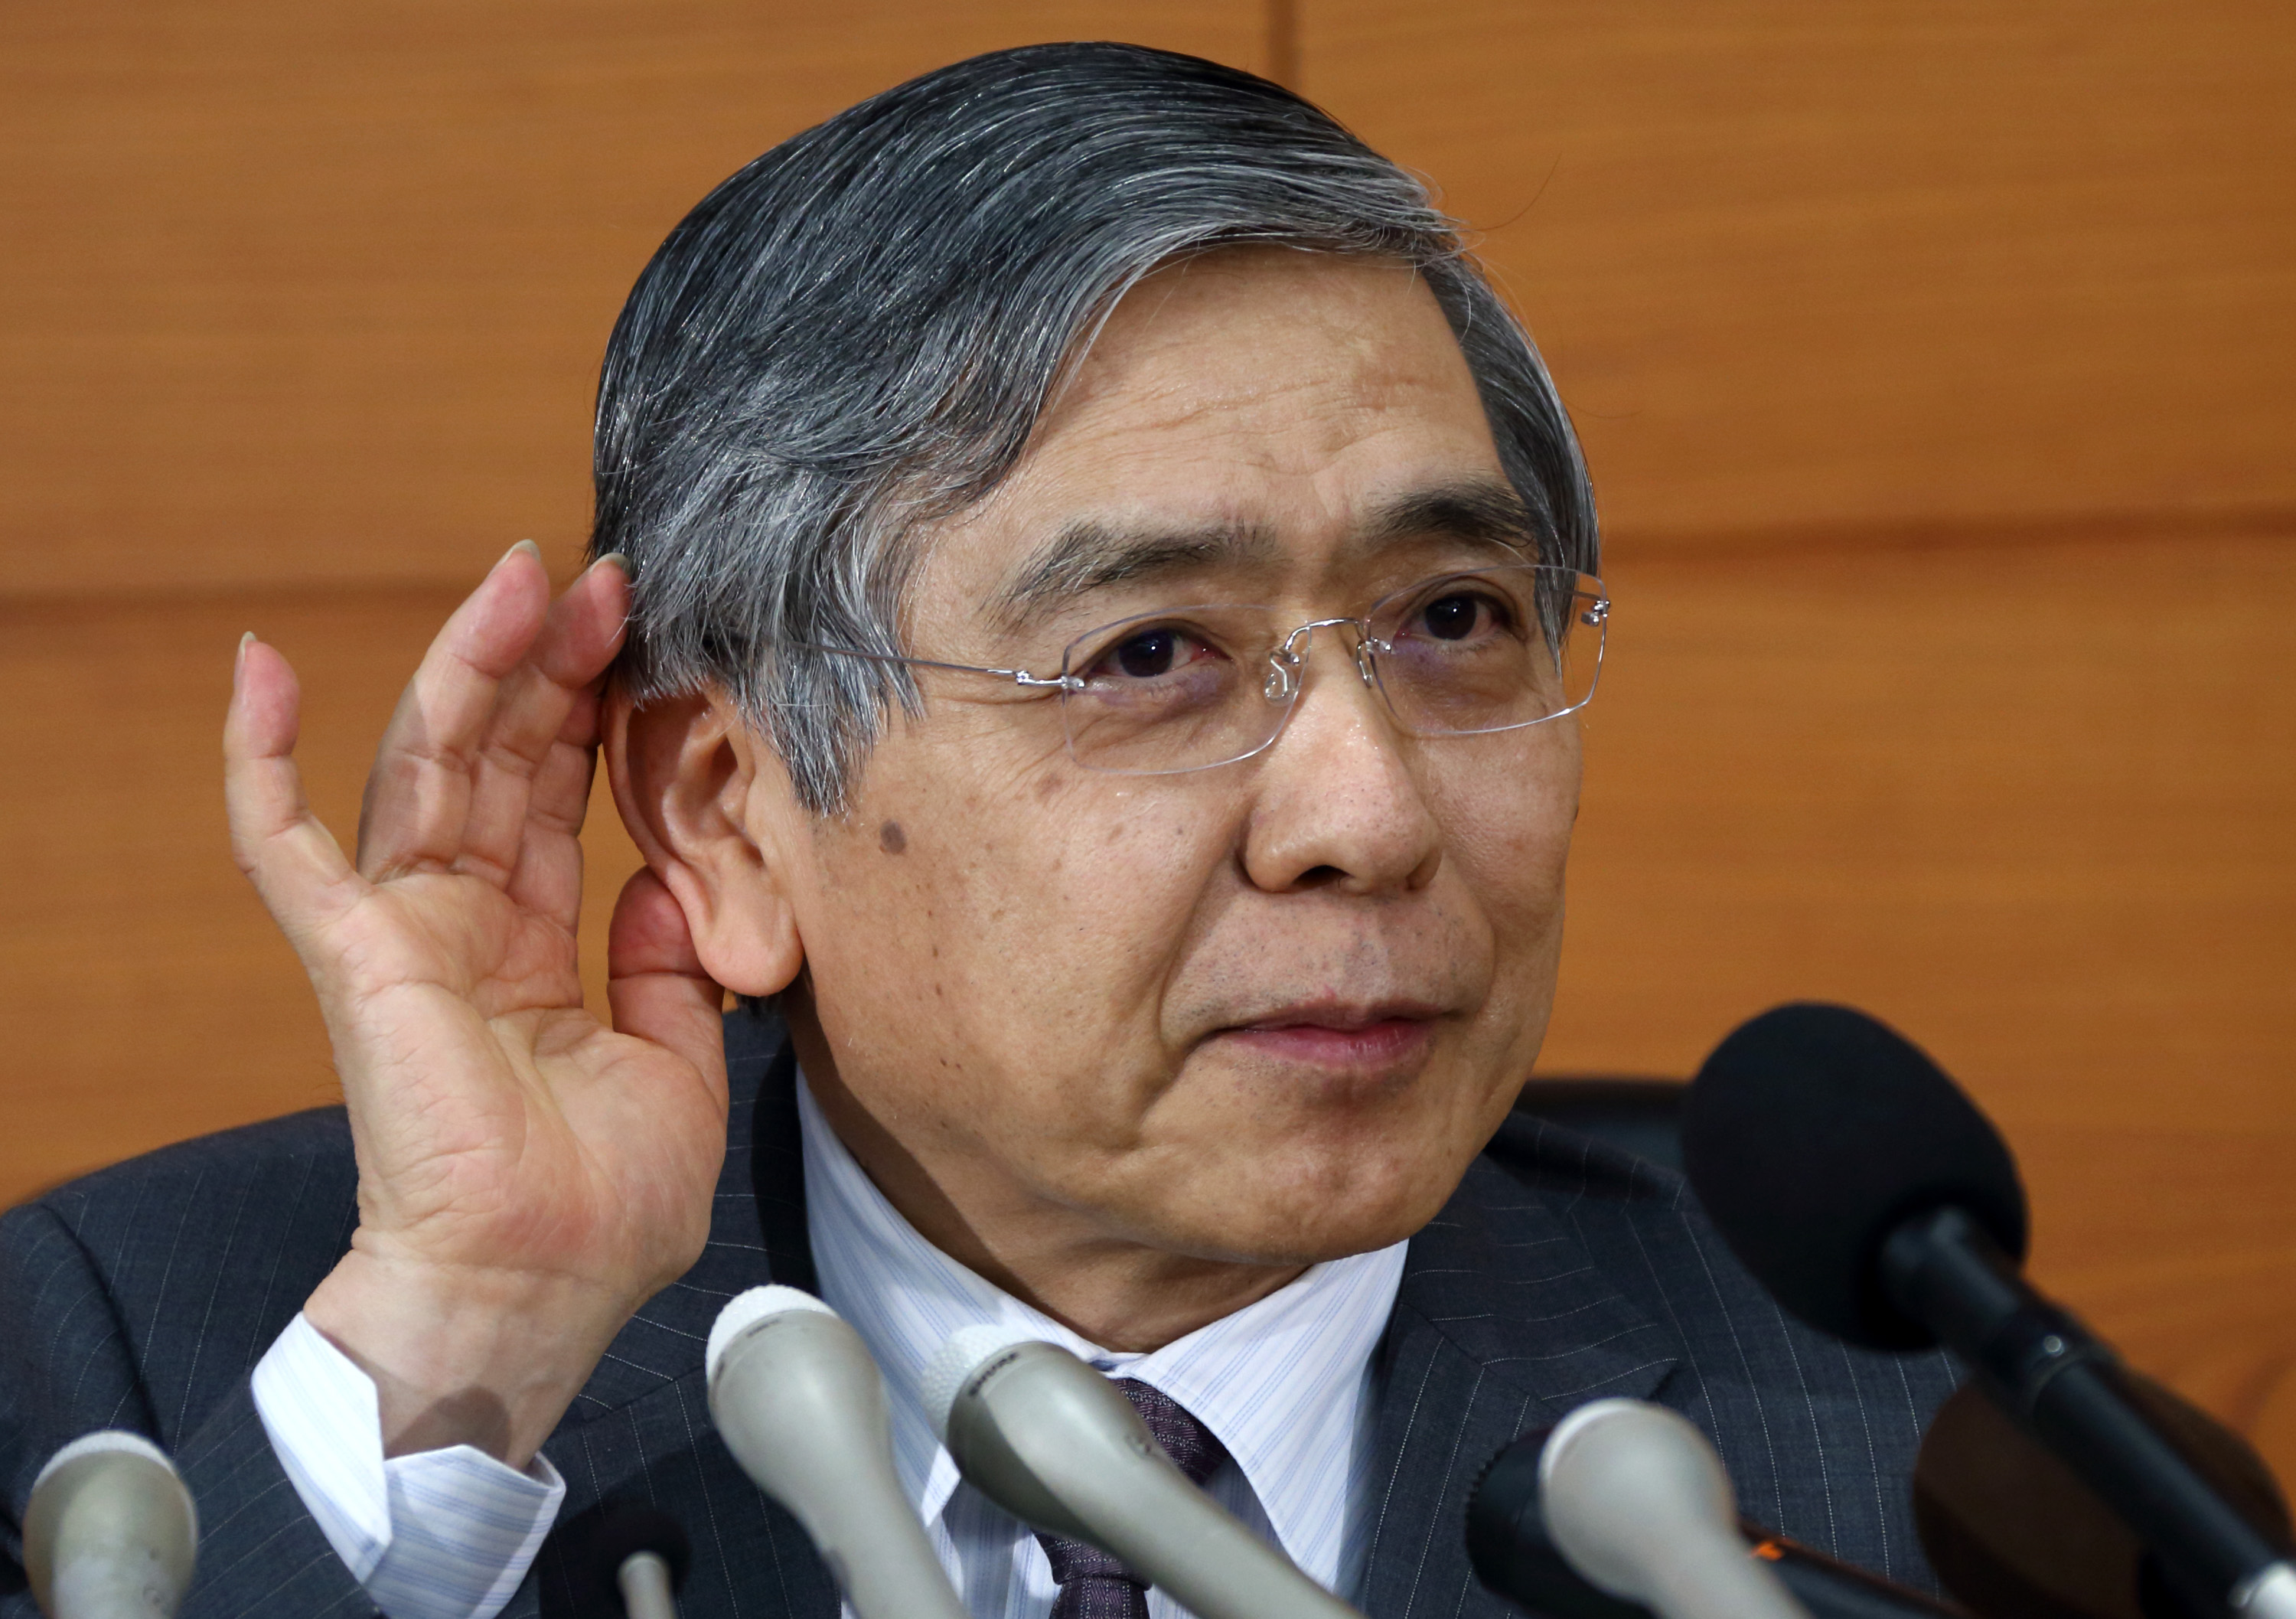 Bank of Japan Gov. Haruhiko Kuroda listens to a reporter during a news conference at the central bank's headquarters in Tokyo on April 30. | BLOOMBERG